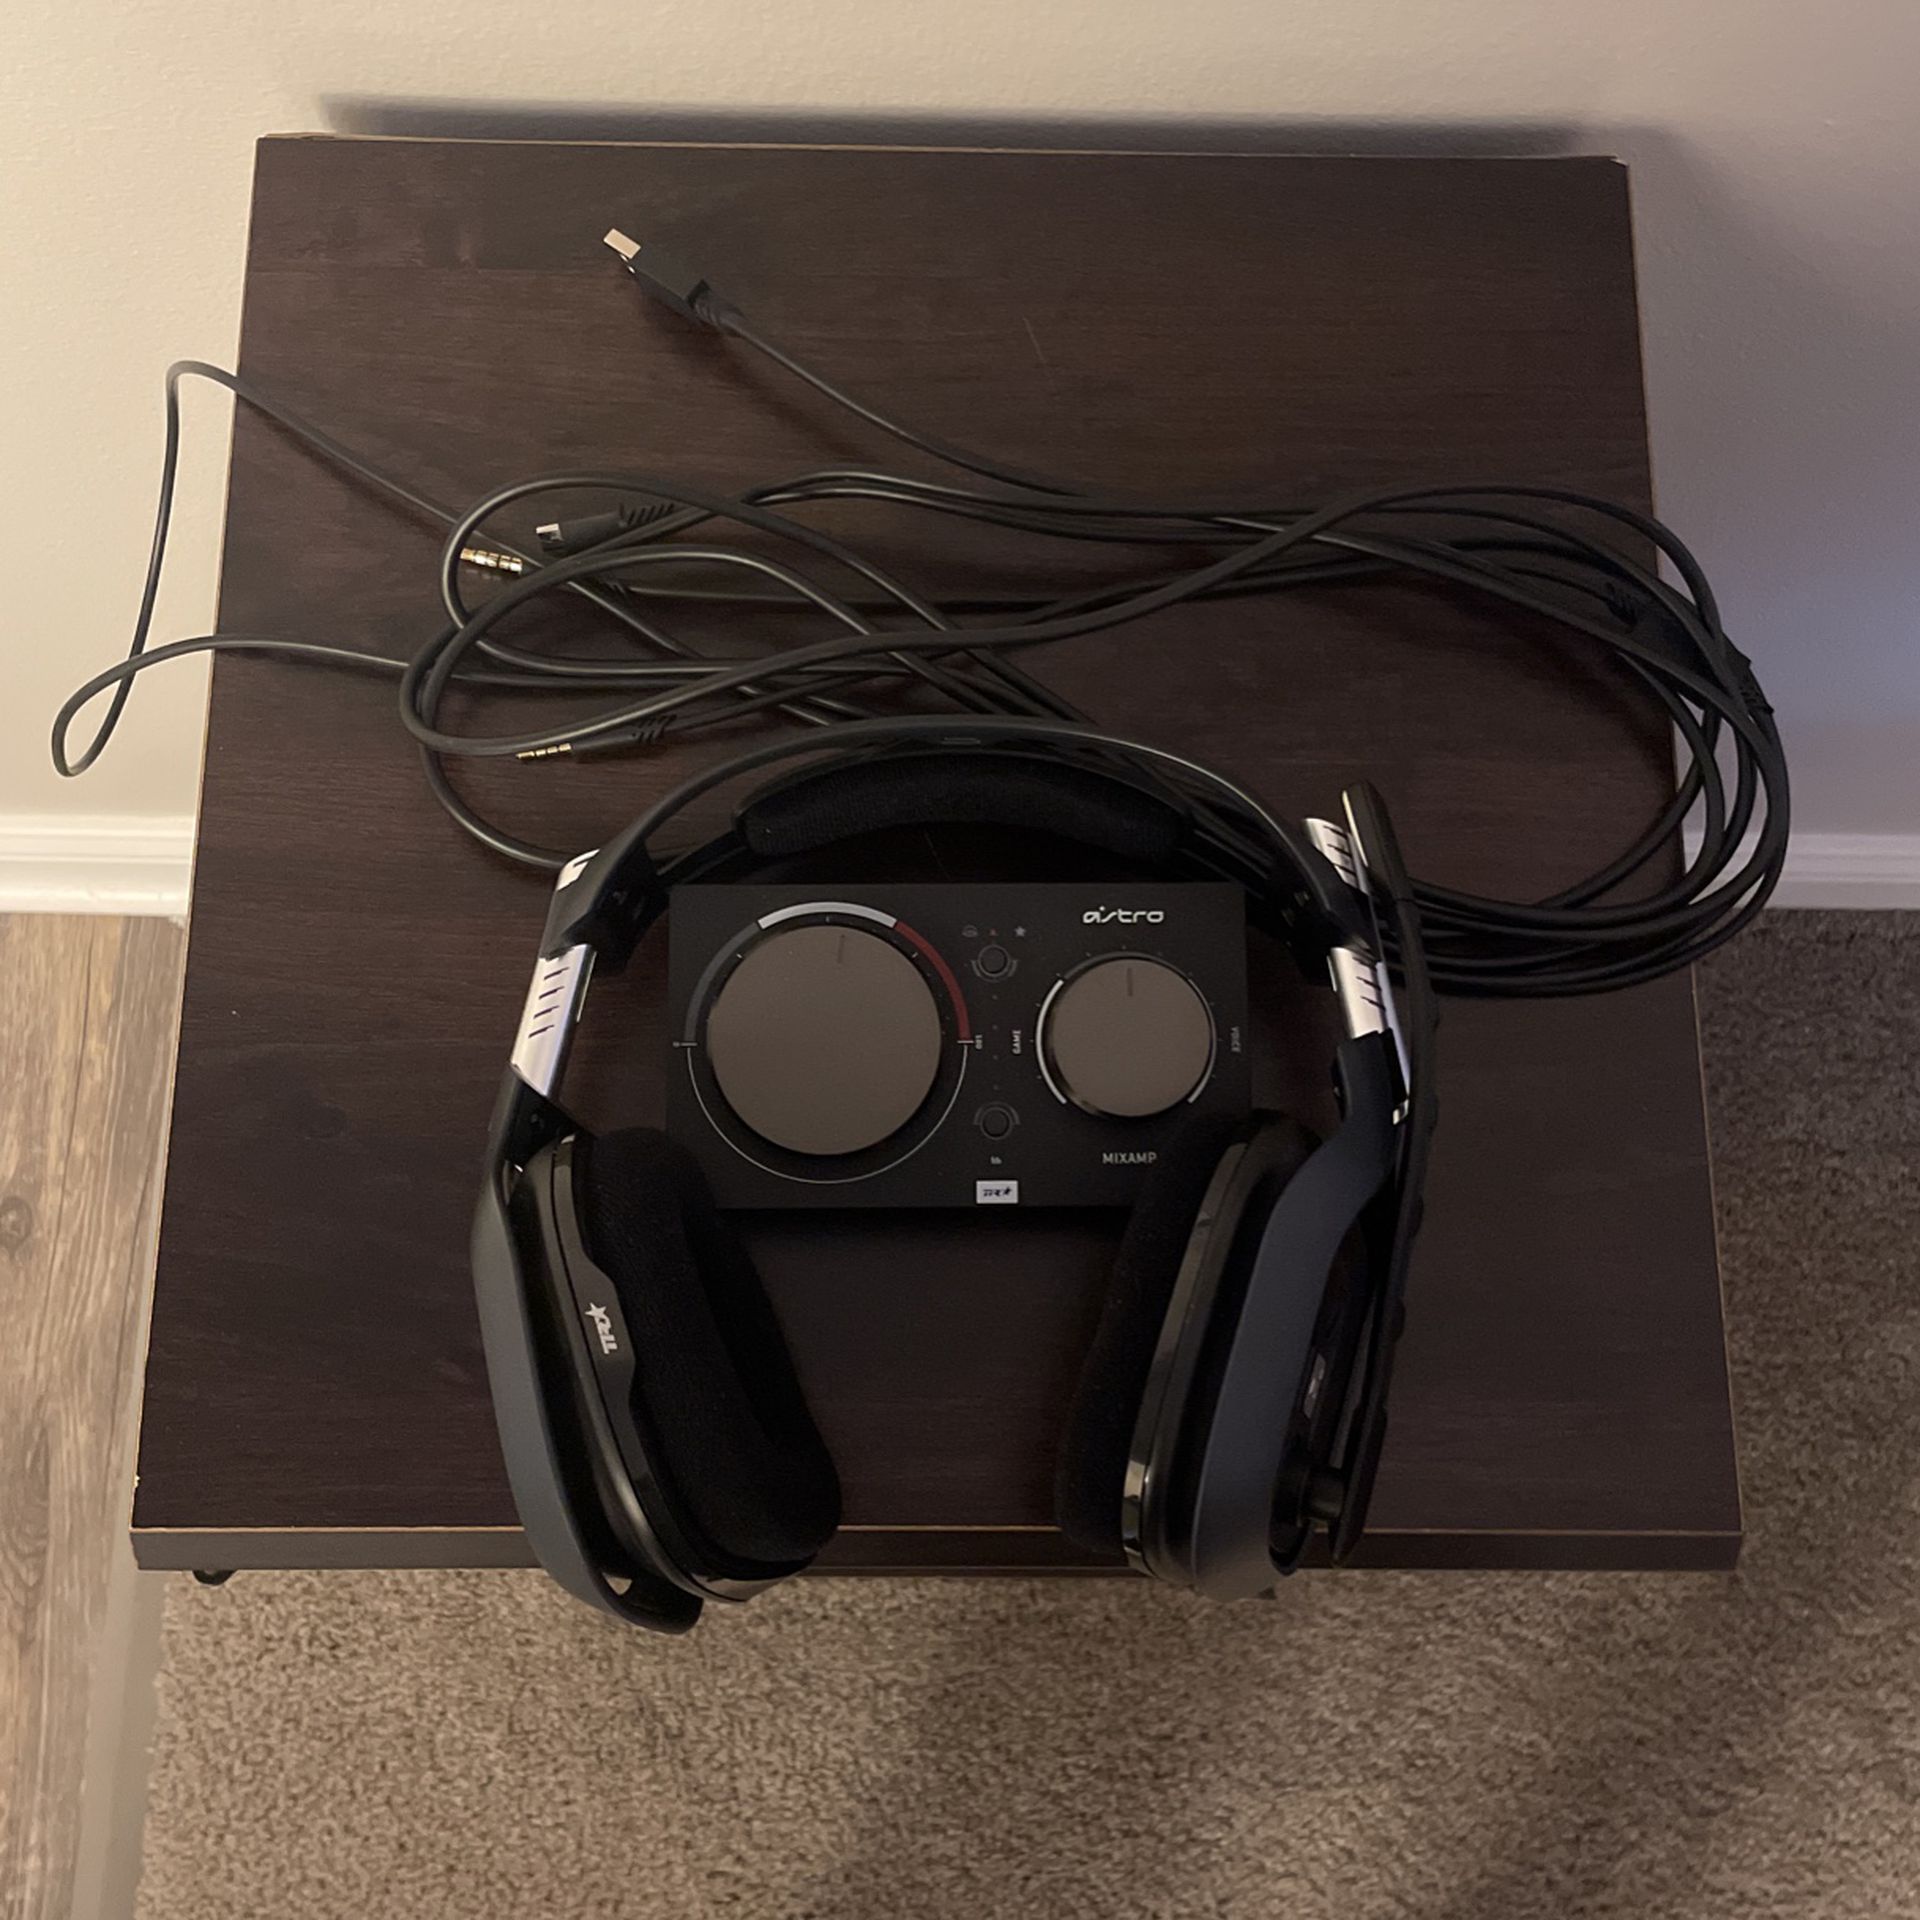 brand new astro a40tr pro headset and mixamp for xbox and pc!